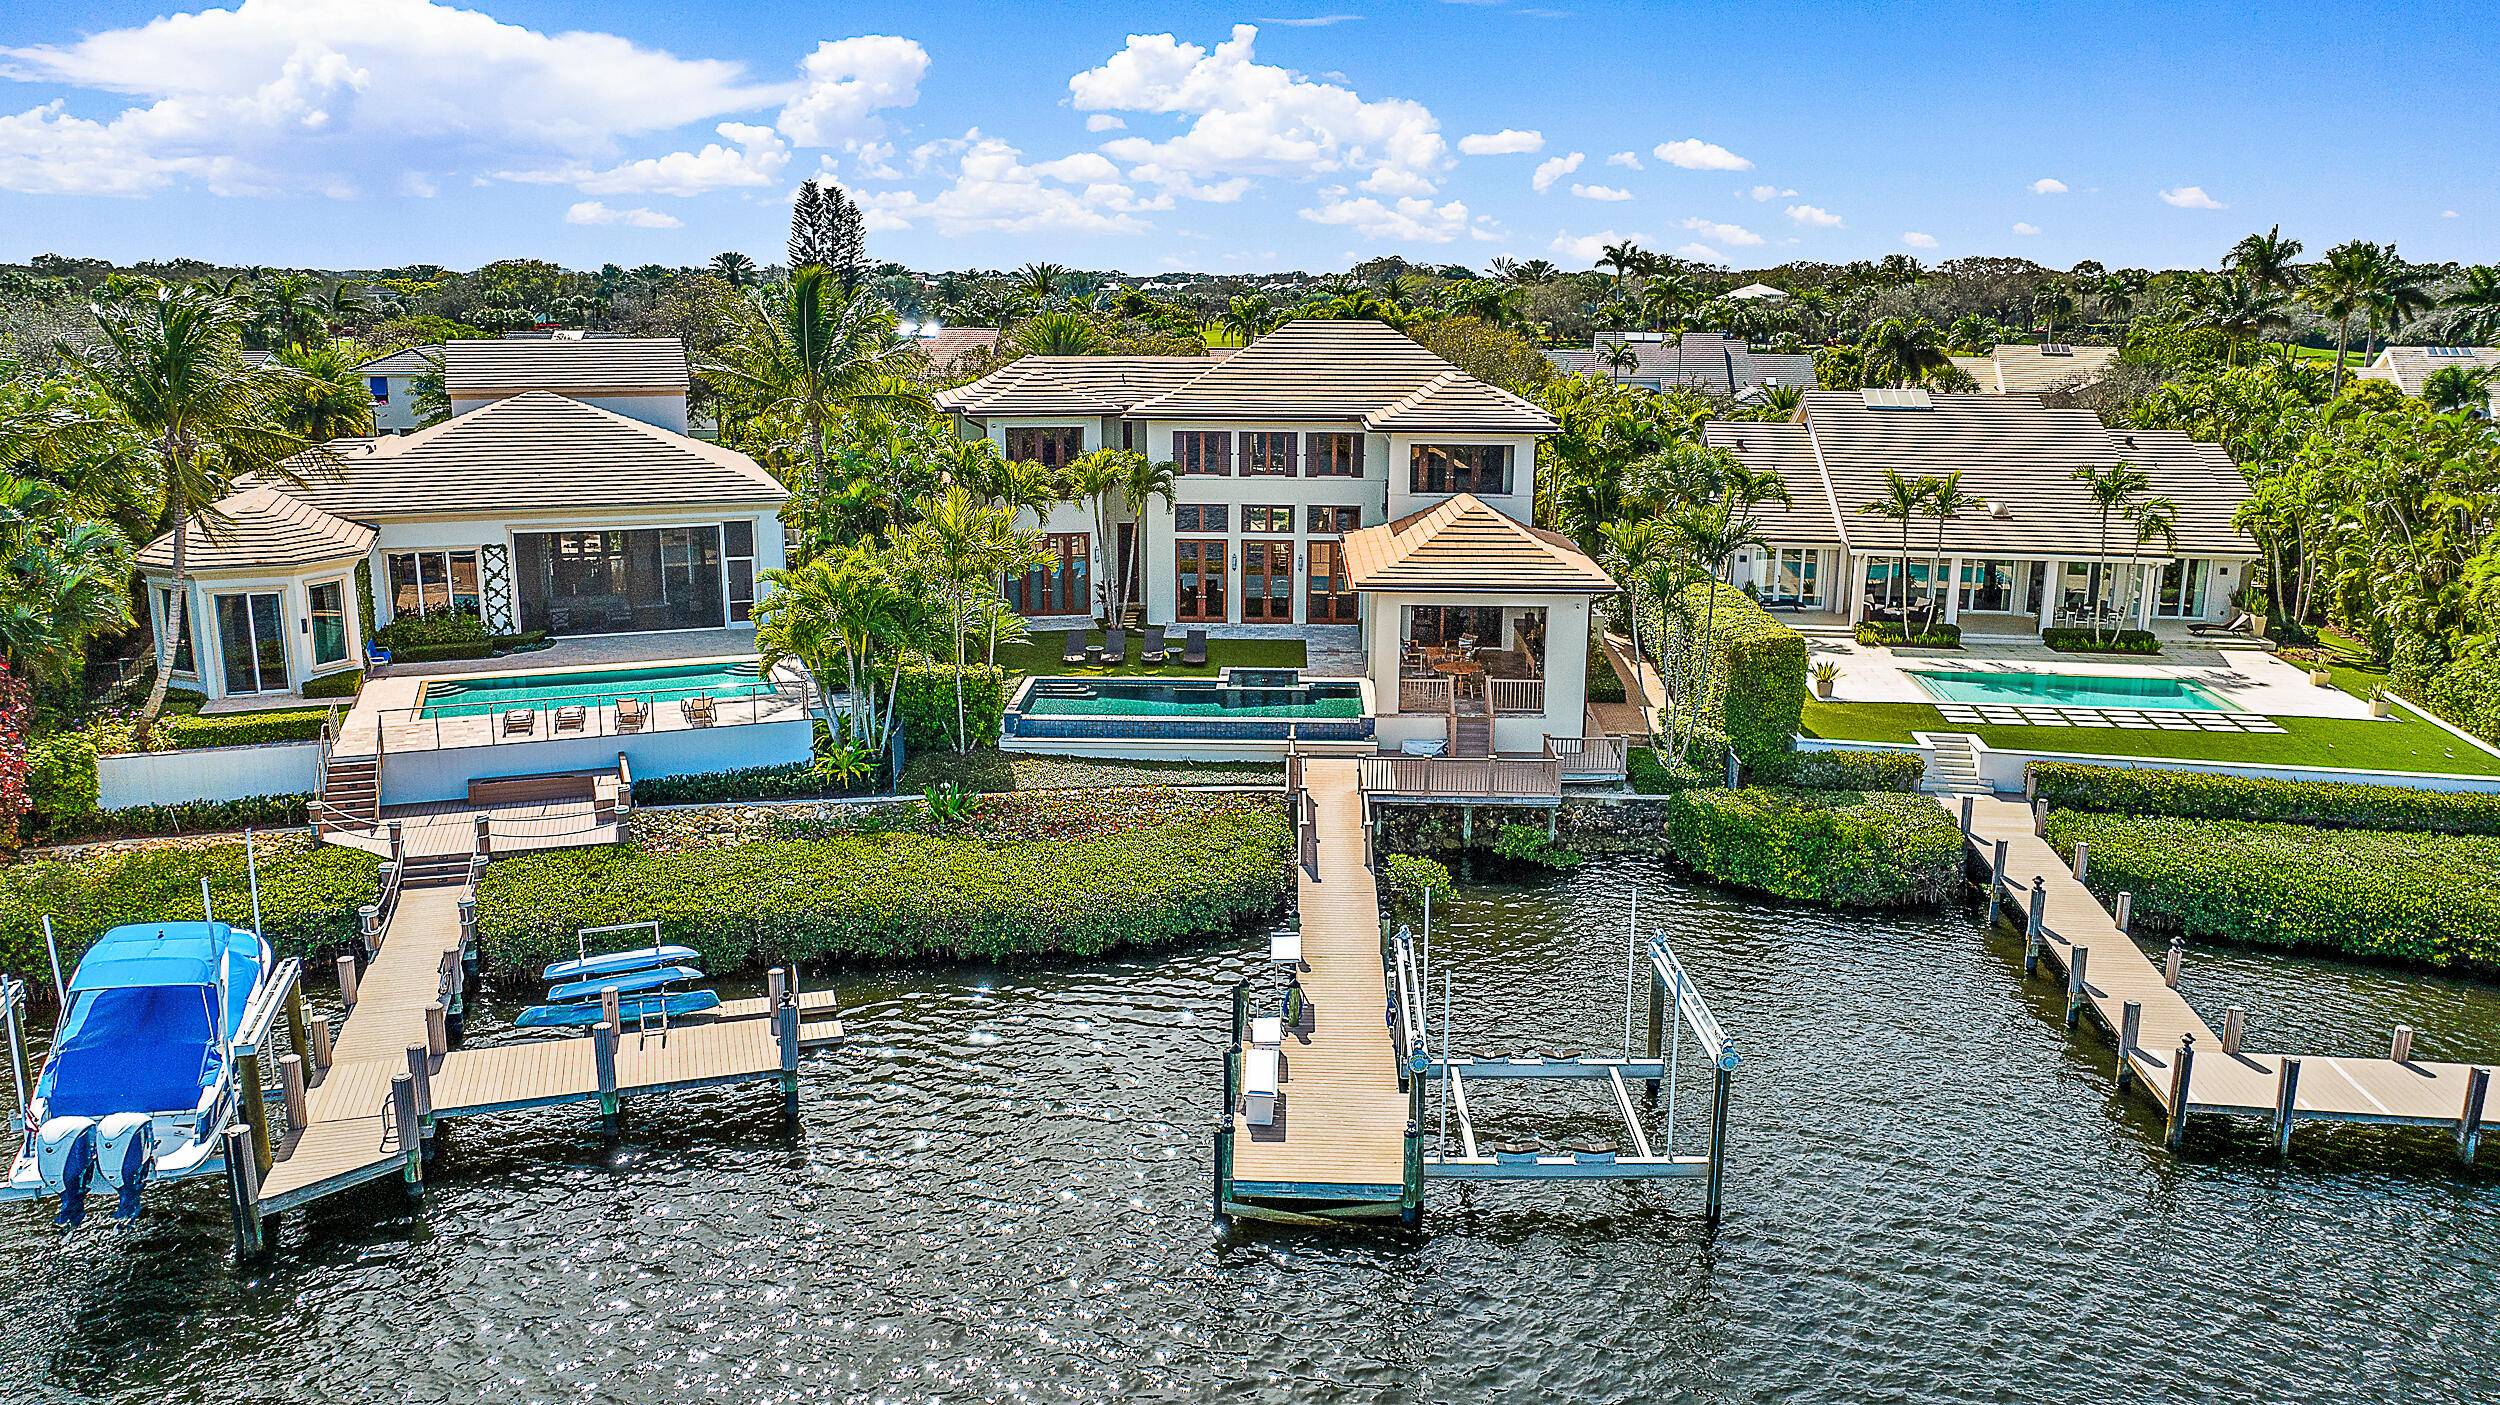 This custom waterfront home built by the award winning Turtle Beach Construction features jaw dropping wide water views from the moment you step through the door.